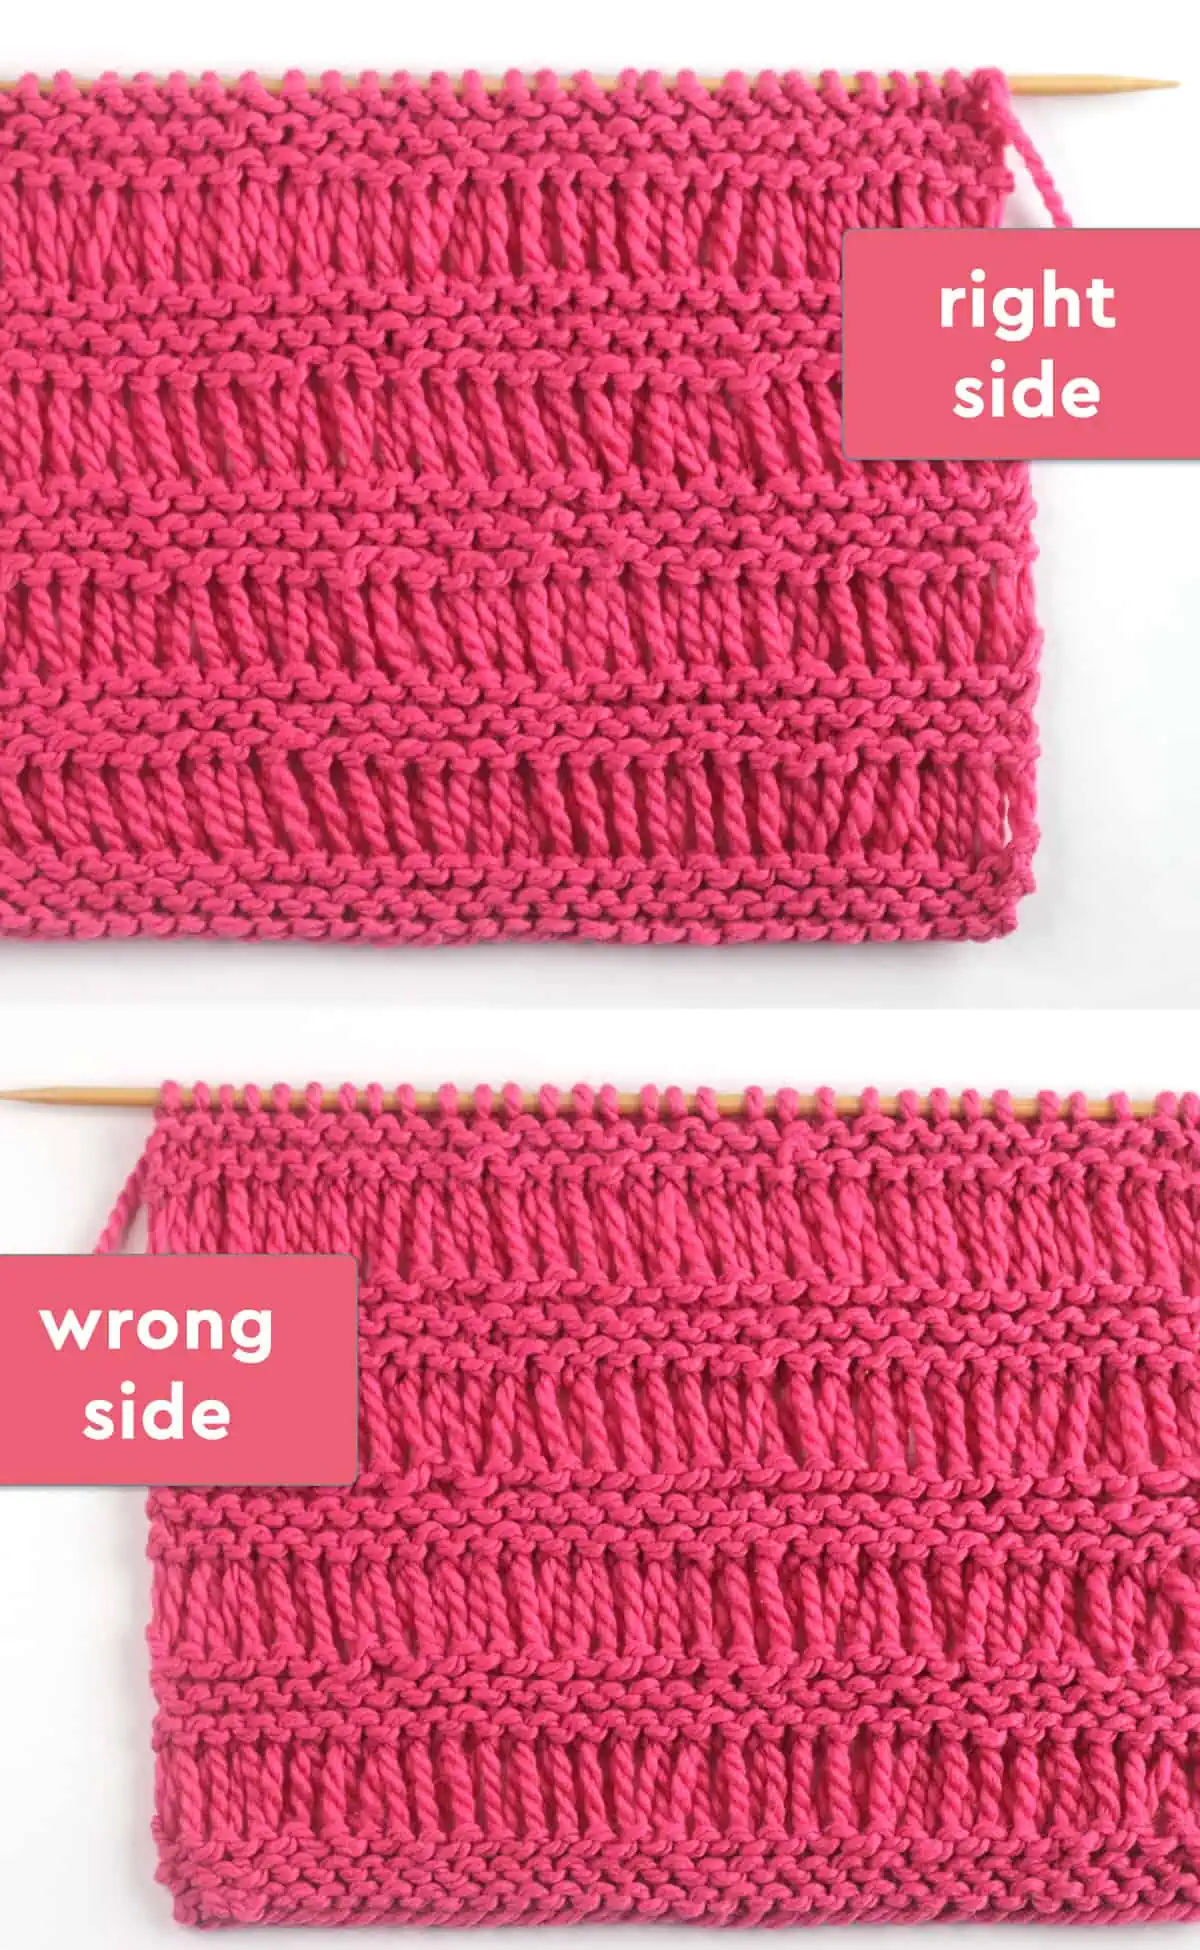 Right and Wrong sides of the Garter Drop Stitch knitting pattern in bright pink yarn color on wooden needle.